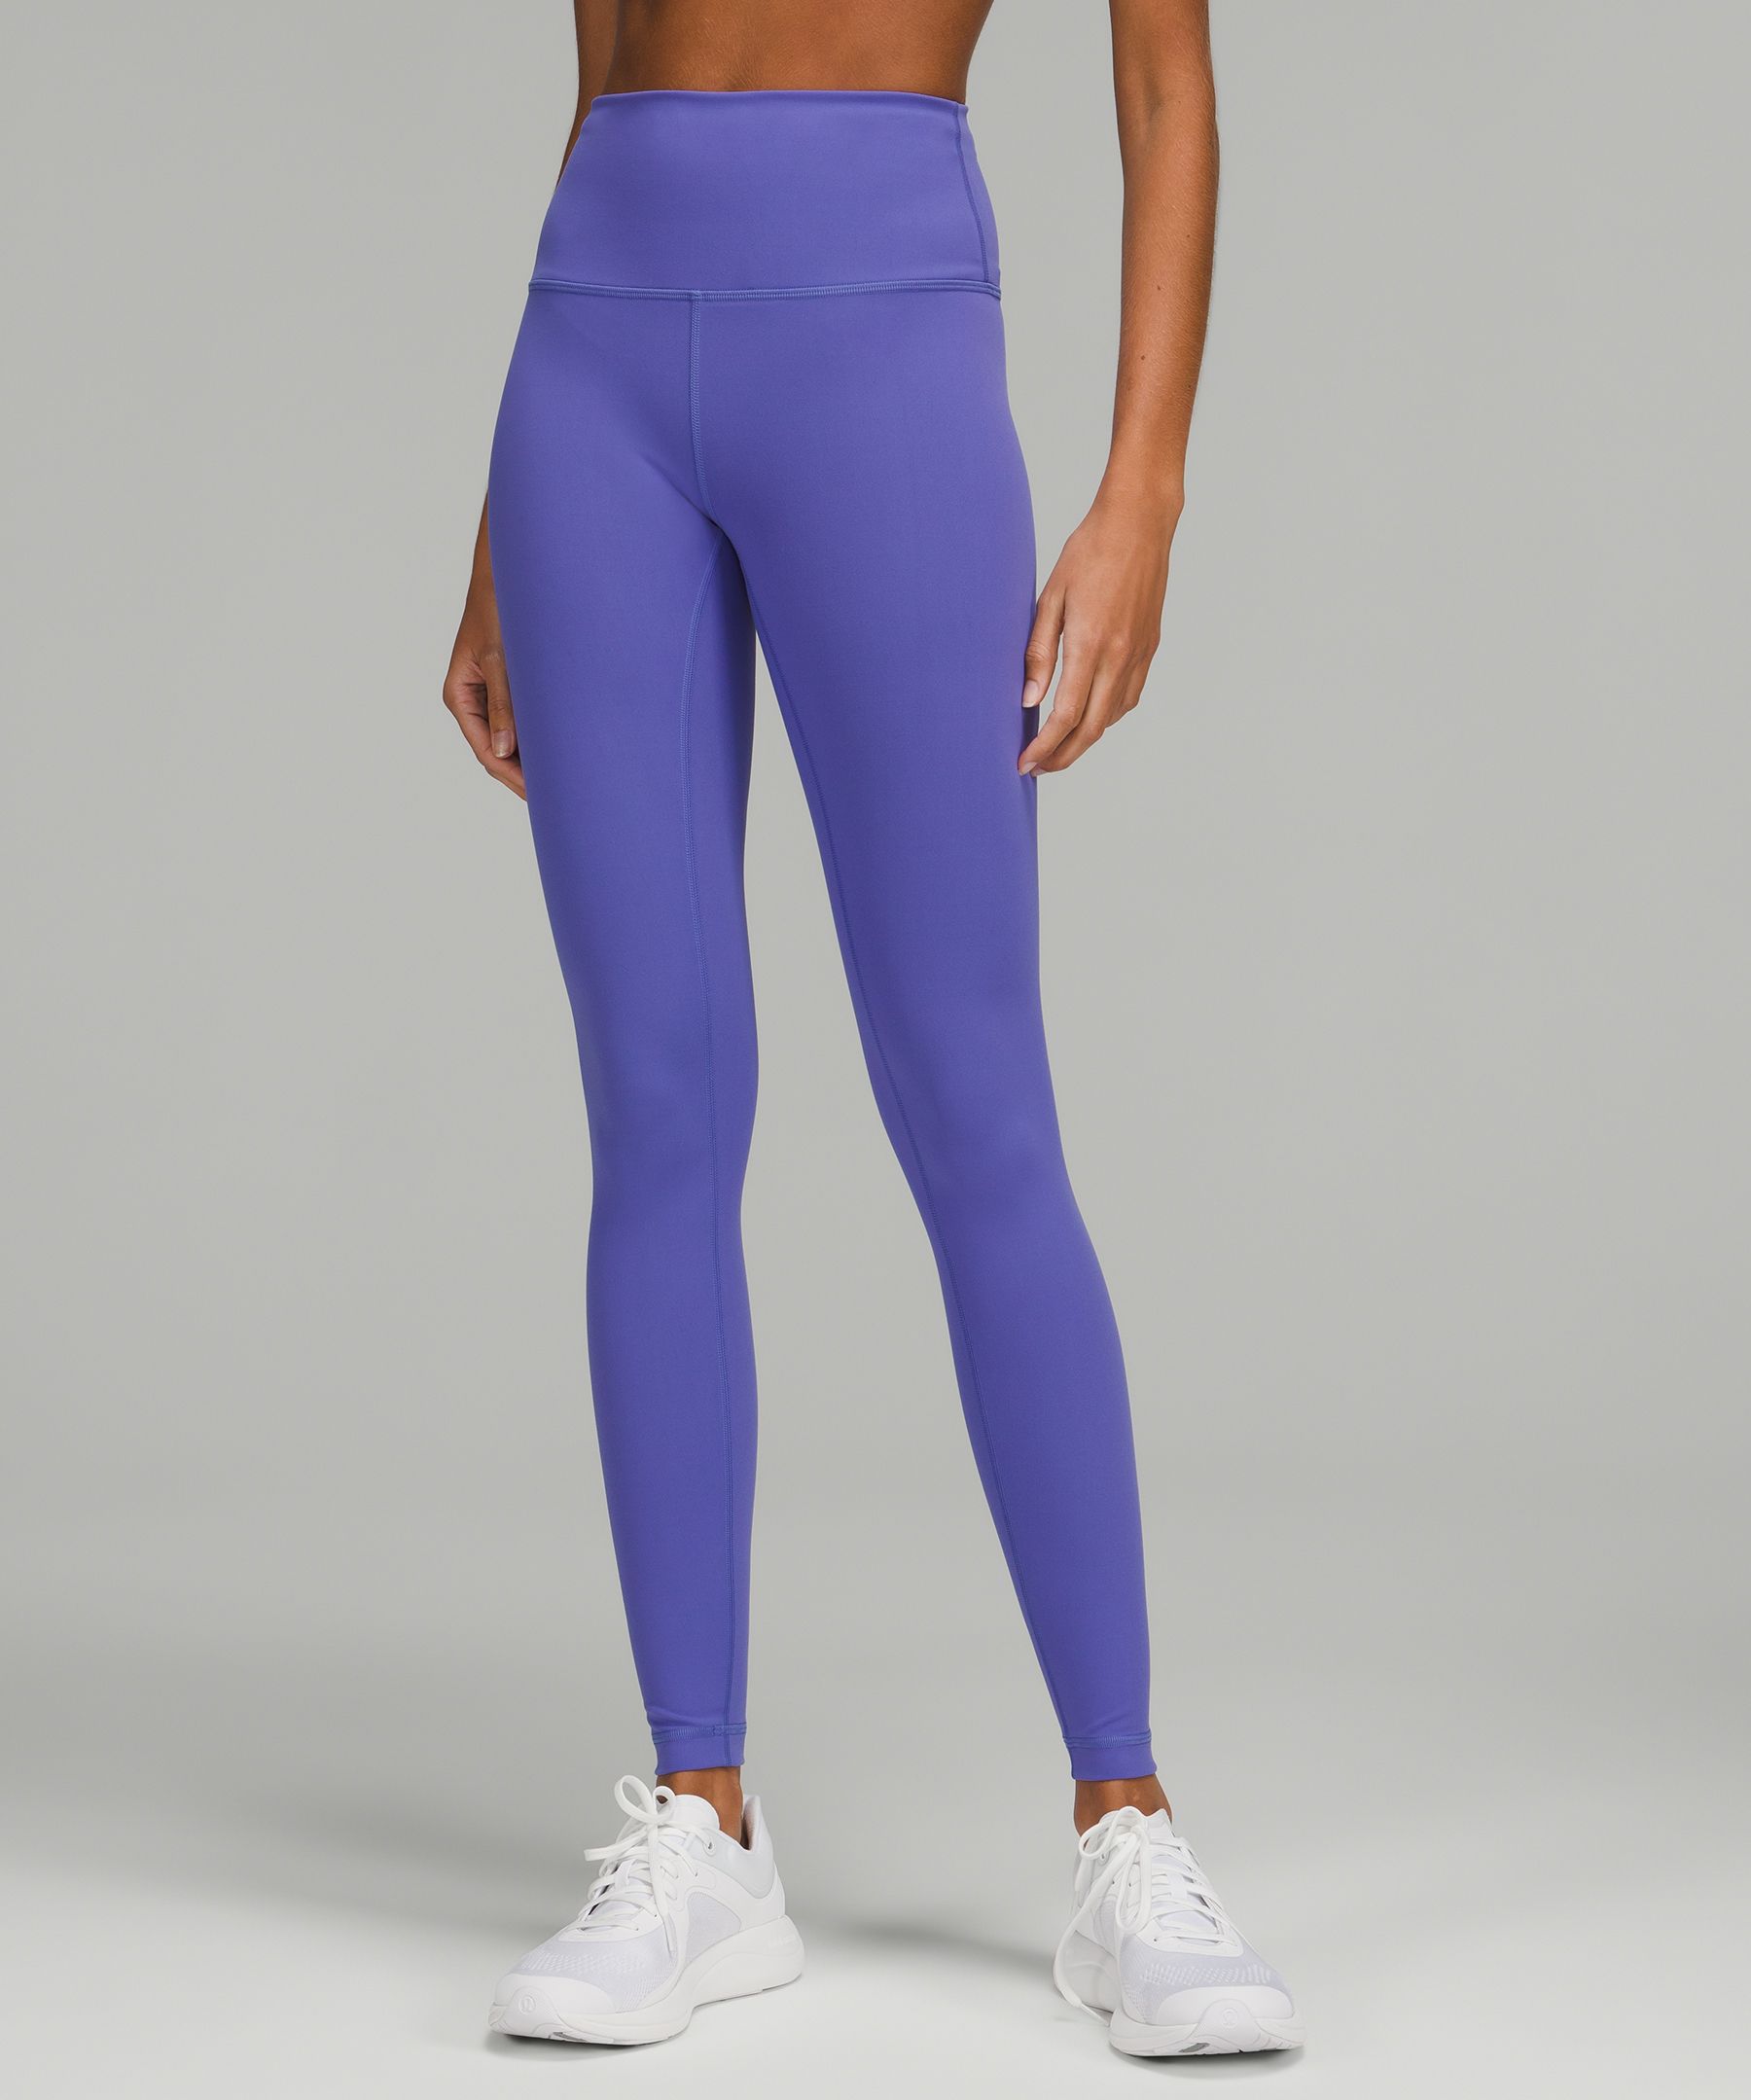 Up to 55% Off lululemon Wunder Train Leggings + Free Shipping, Styles Only  $39 Shipped